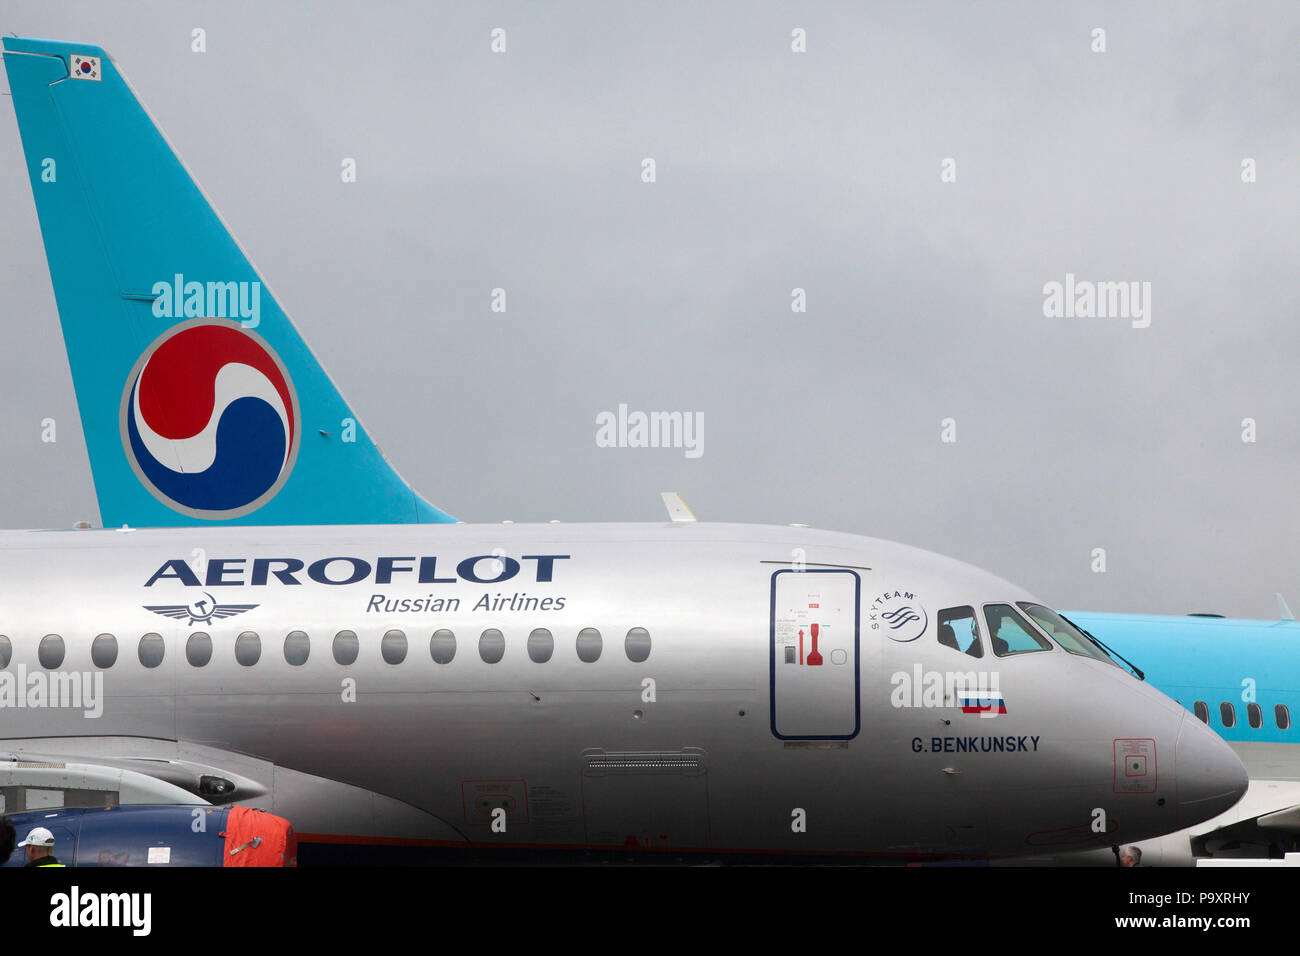 The Sukhoi Superjet-100 airplane of Aeroflot Russian Airlines and Korean Air's Boeing 737-900 displayed at Farnborough-2012 airshow near London, UK Stock Photo